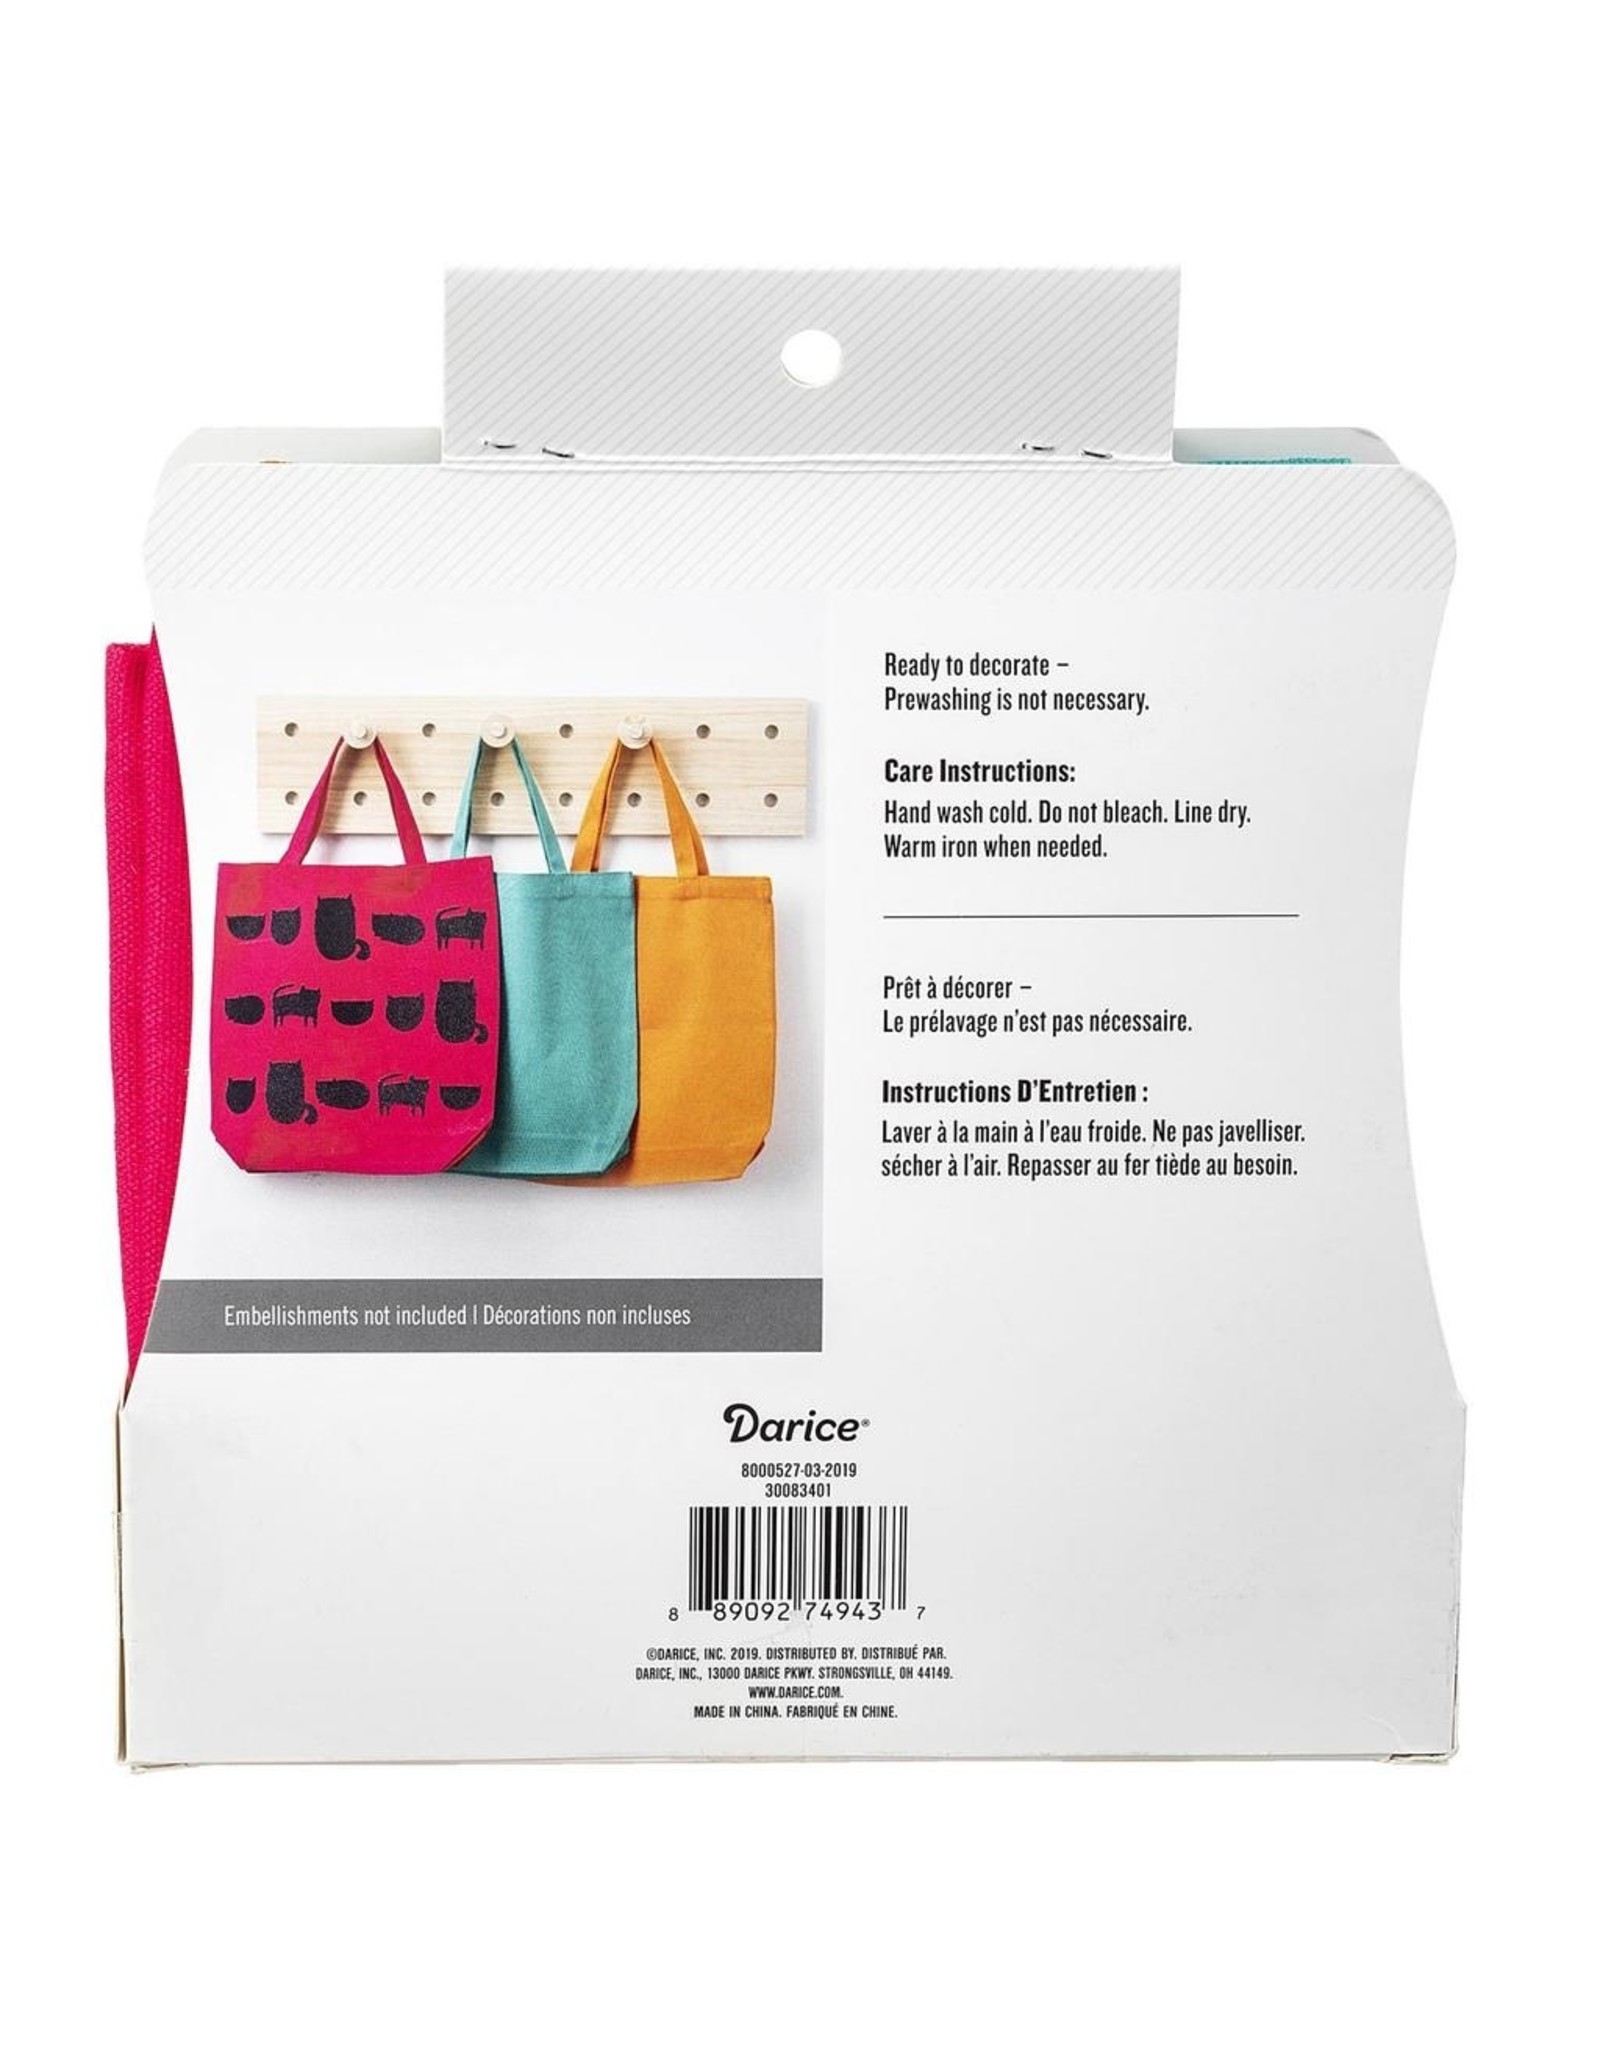 Darice Cotton Canvas Tote 3 Pack 13.5x13.5 Inch Pink Teal Orange